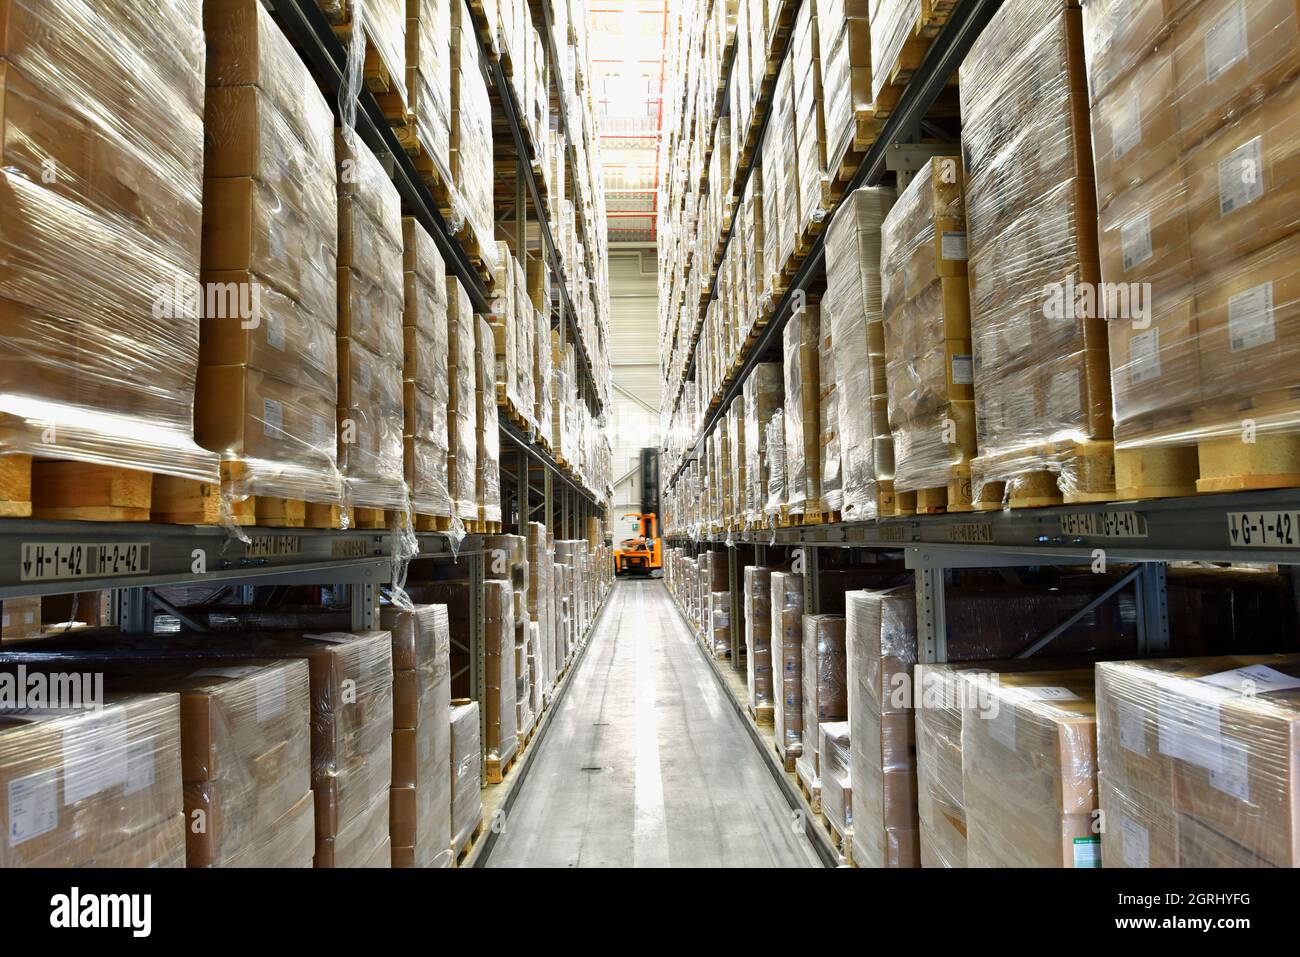 high-bay warehouse in an industrial company Stock Photo